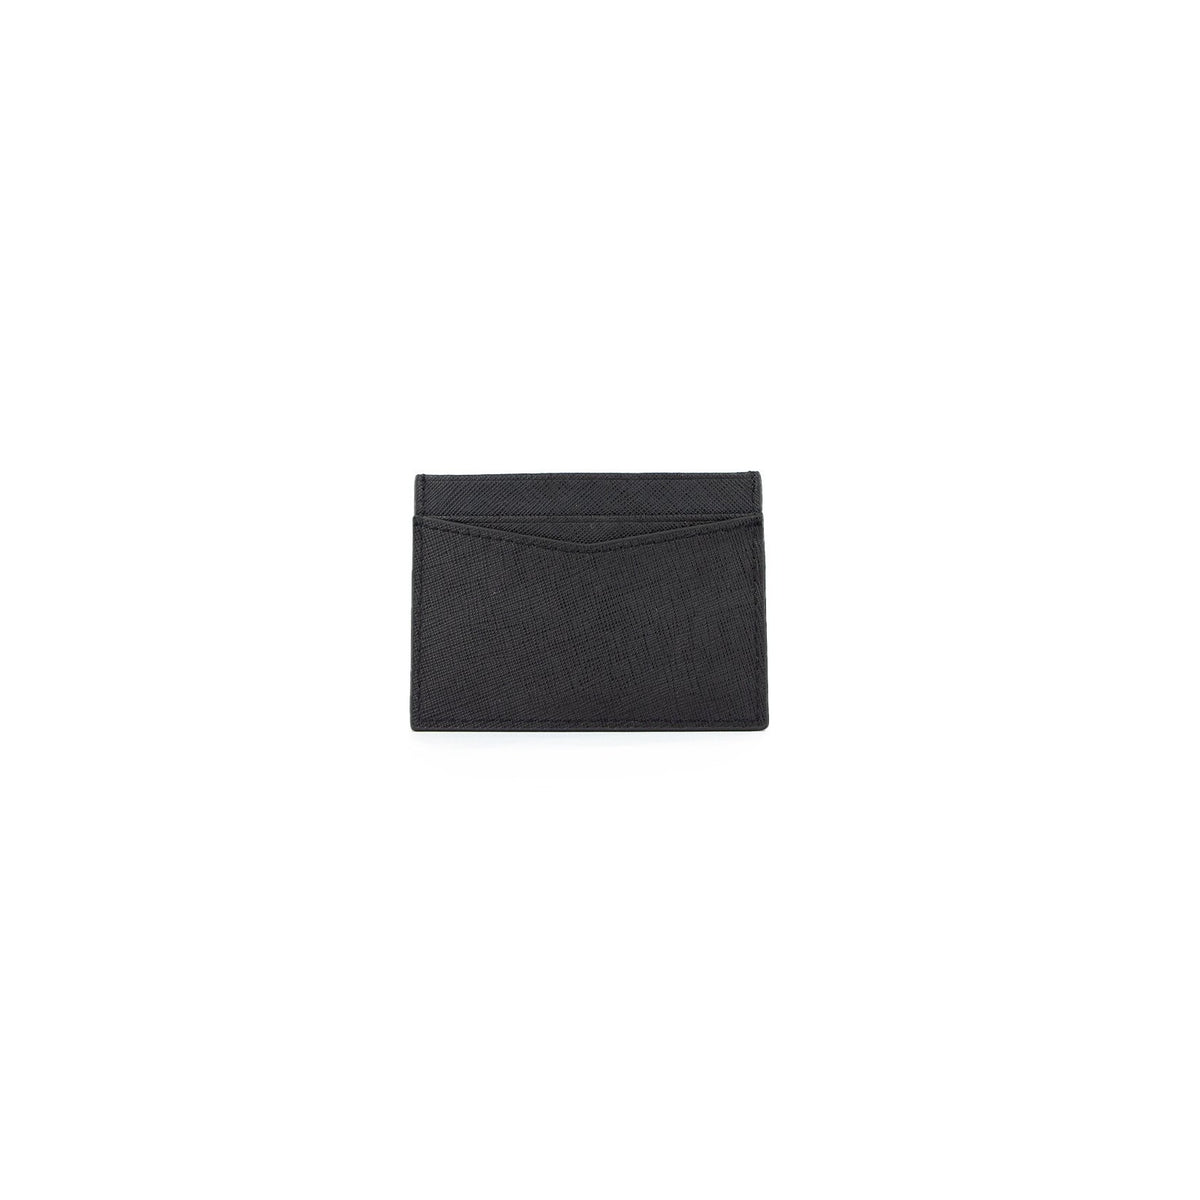 Personalised Card Holder - Black Saffiano Leather